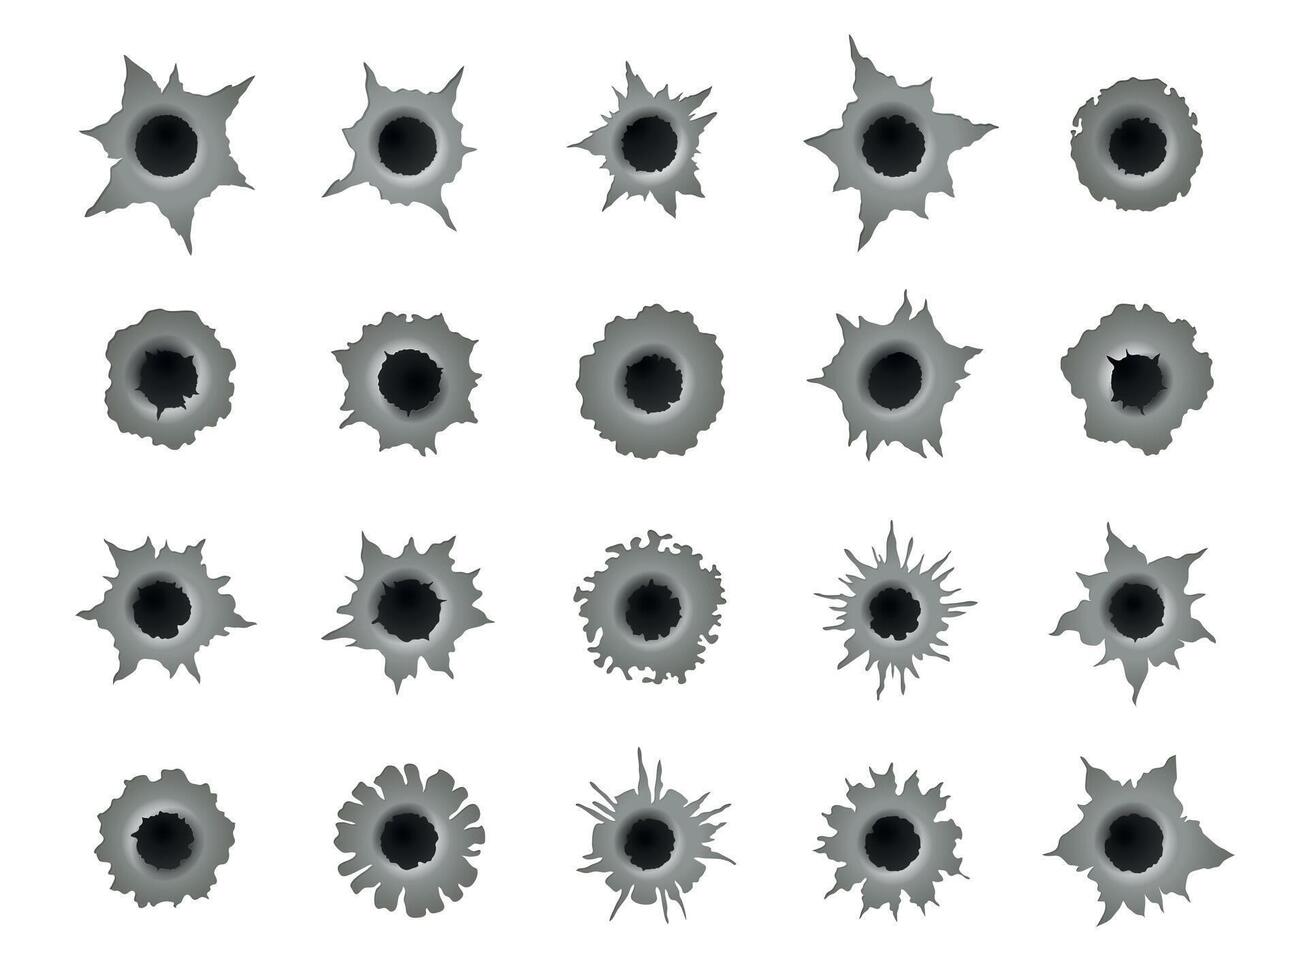 Shot holes. Gun bullet circle crack, ragged circular damage destruction torn hit on surface, peeling gap fissure elements. Vector isolated collection